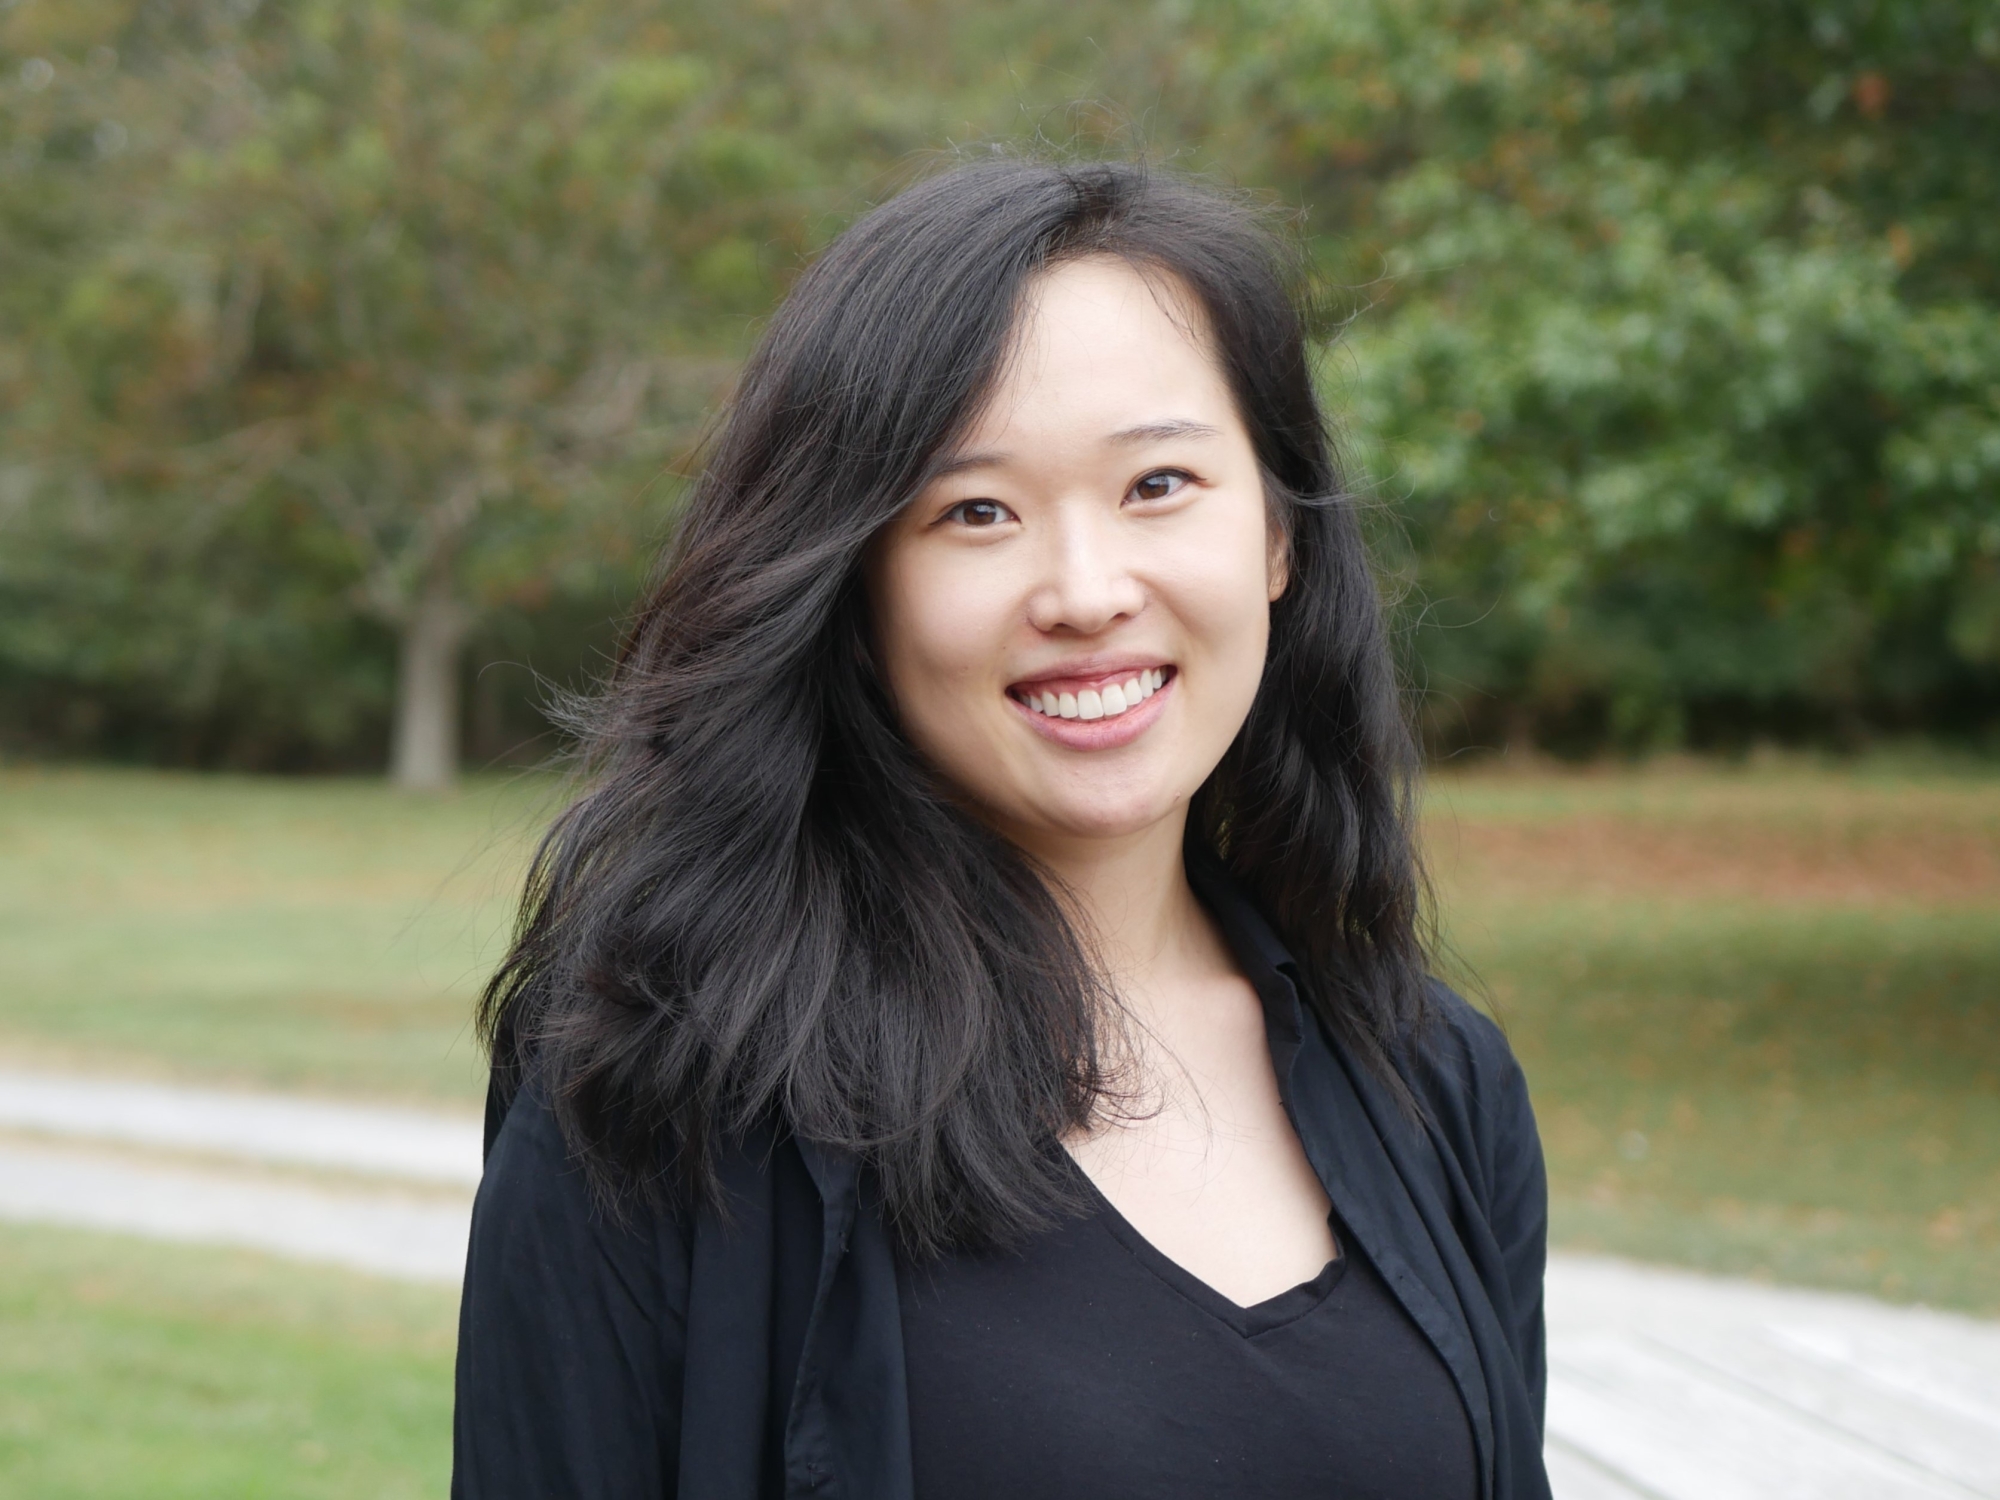 Portrait of Carol Kim outdoors in a grassy area with trees and a path